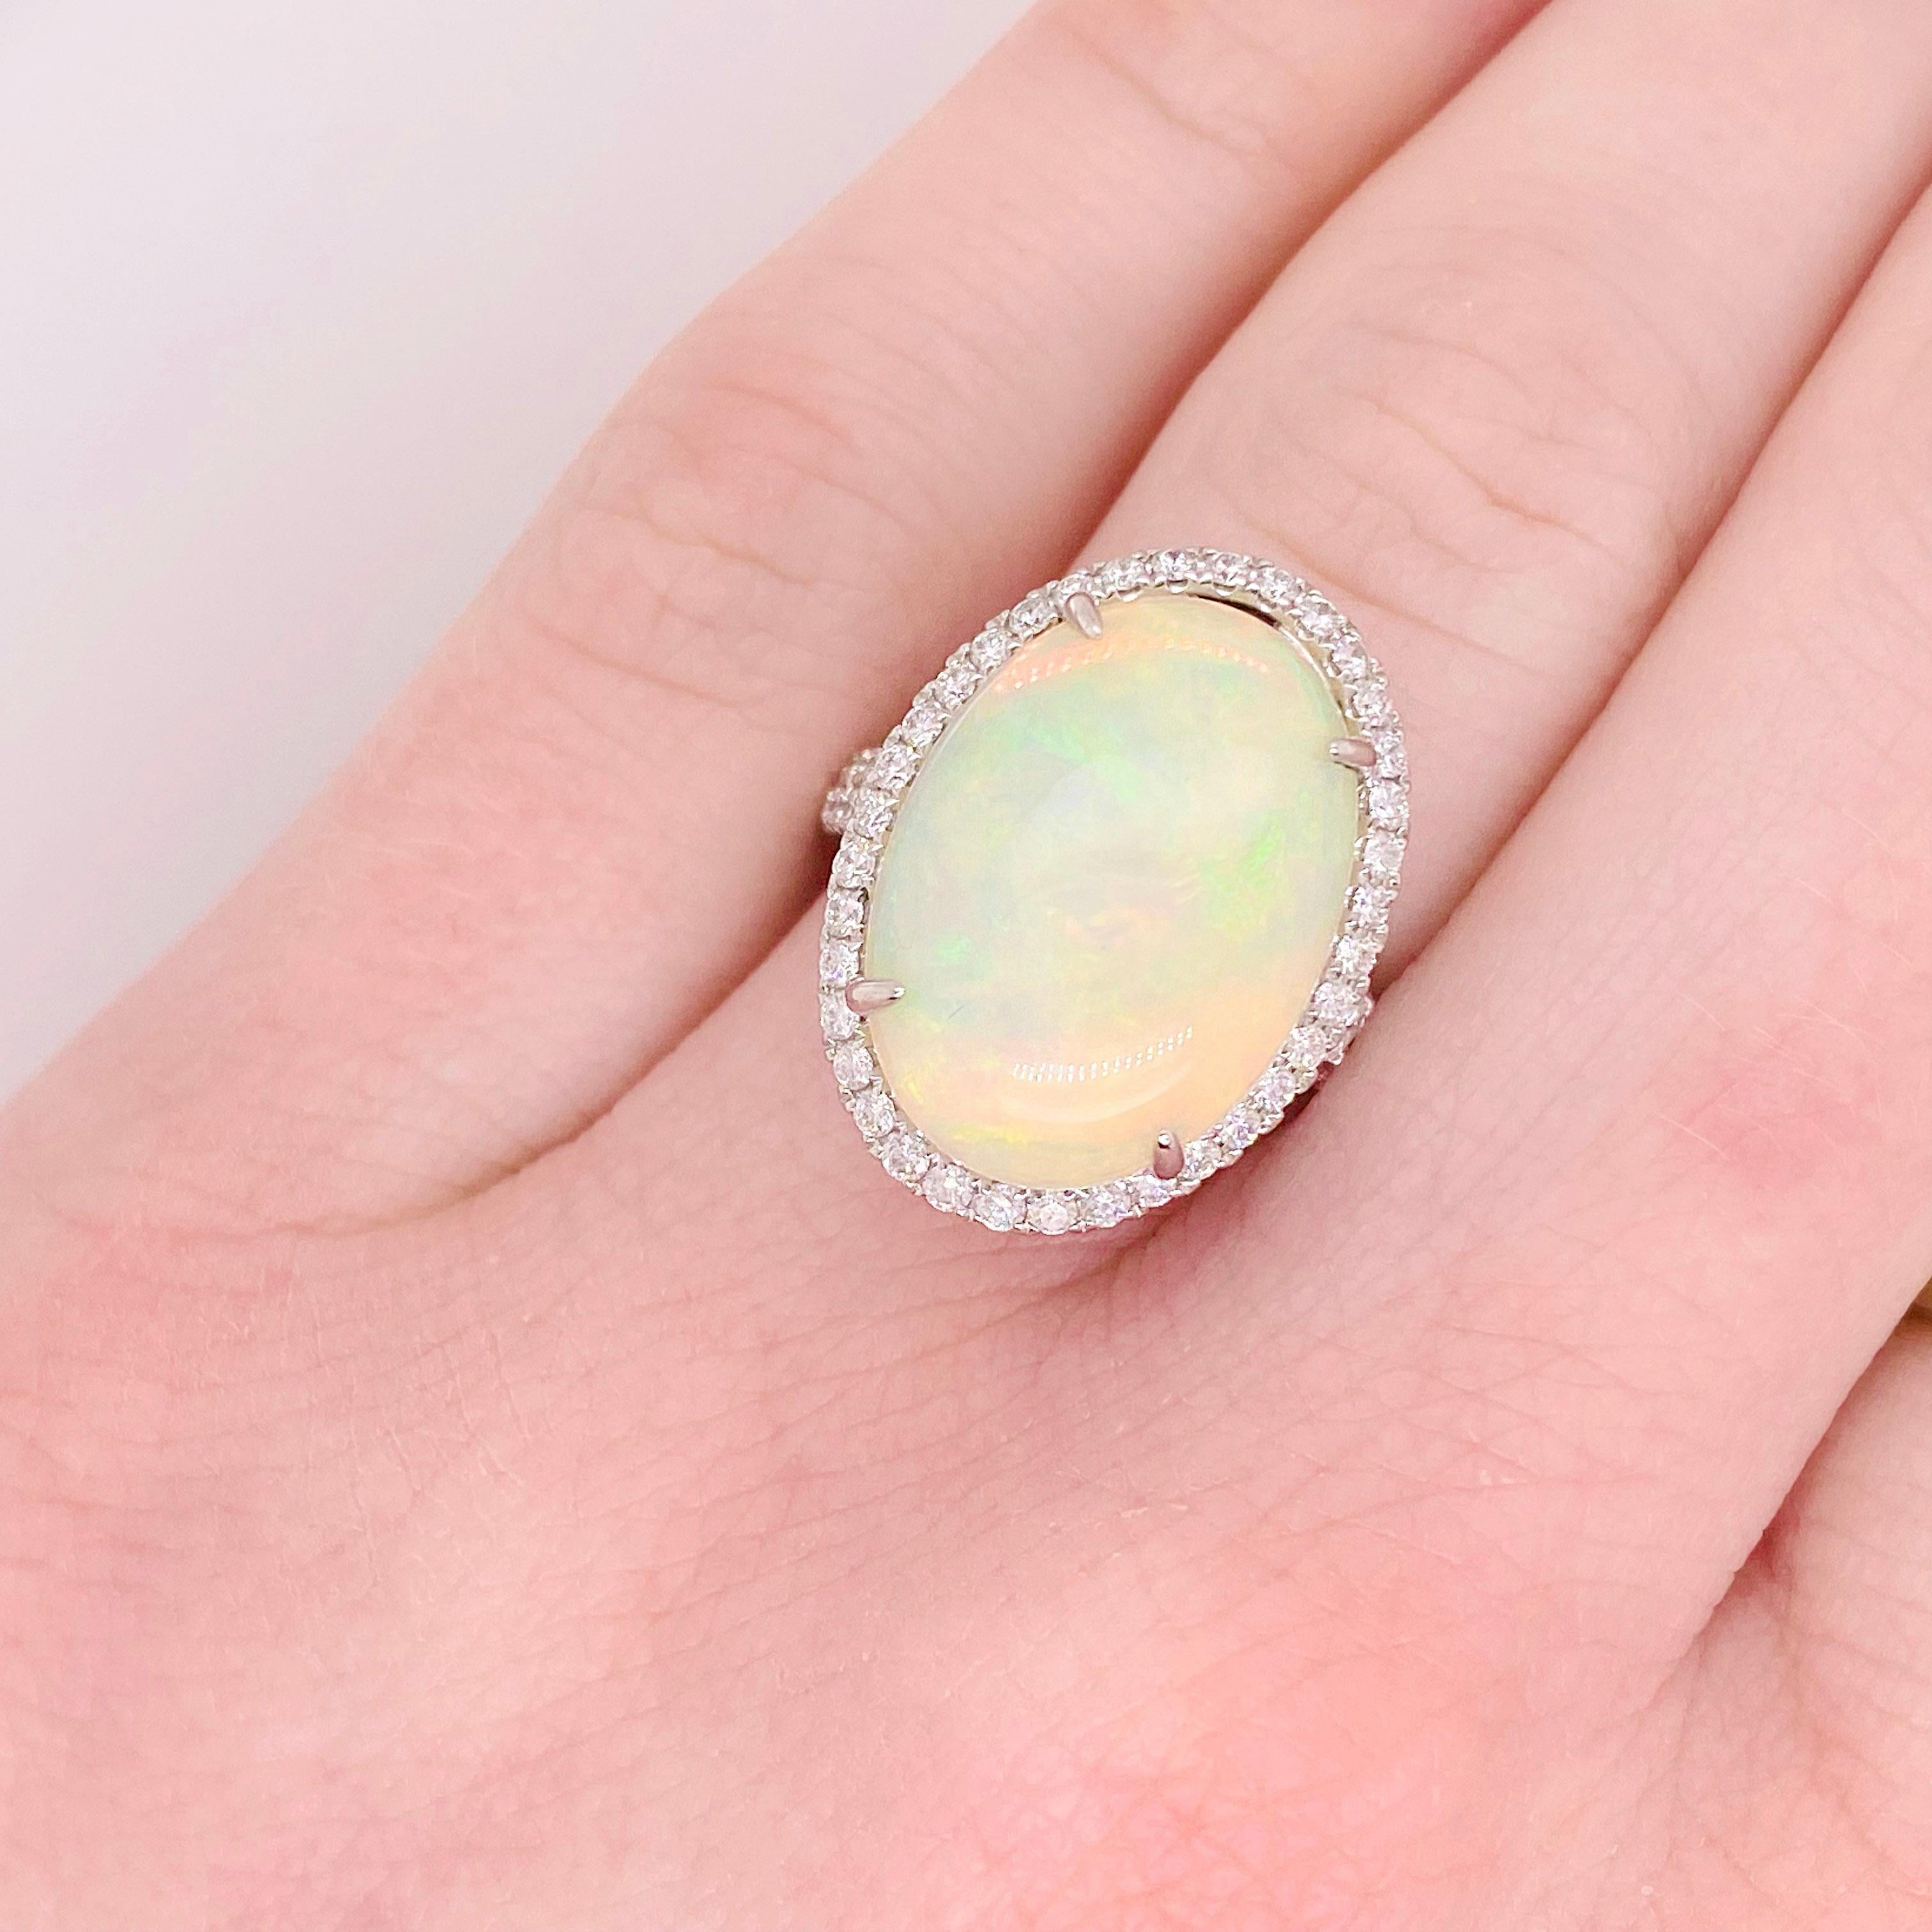 This fiery 7.13 carat opal has flashes of blue, green, and vibrant pink and there are 74 diamonds to frame its beauty. The colors look even more intense in the center of a stunning white diamond halo. More diamonds fall down the split band with one